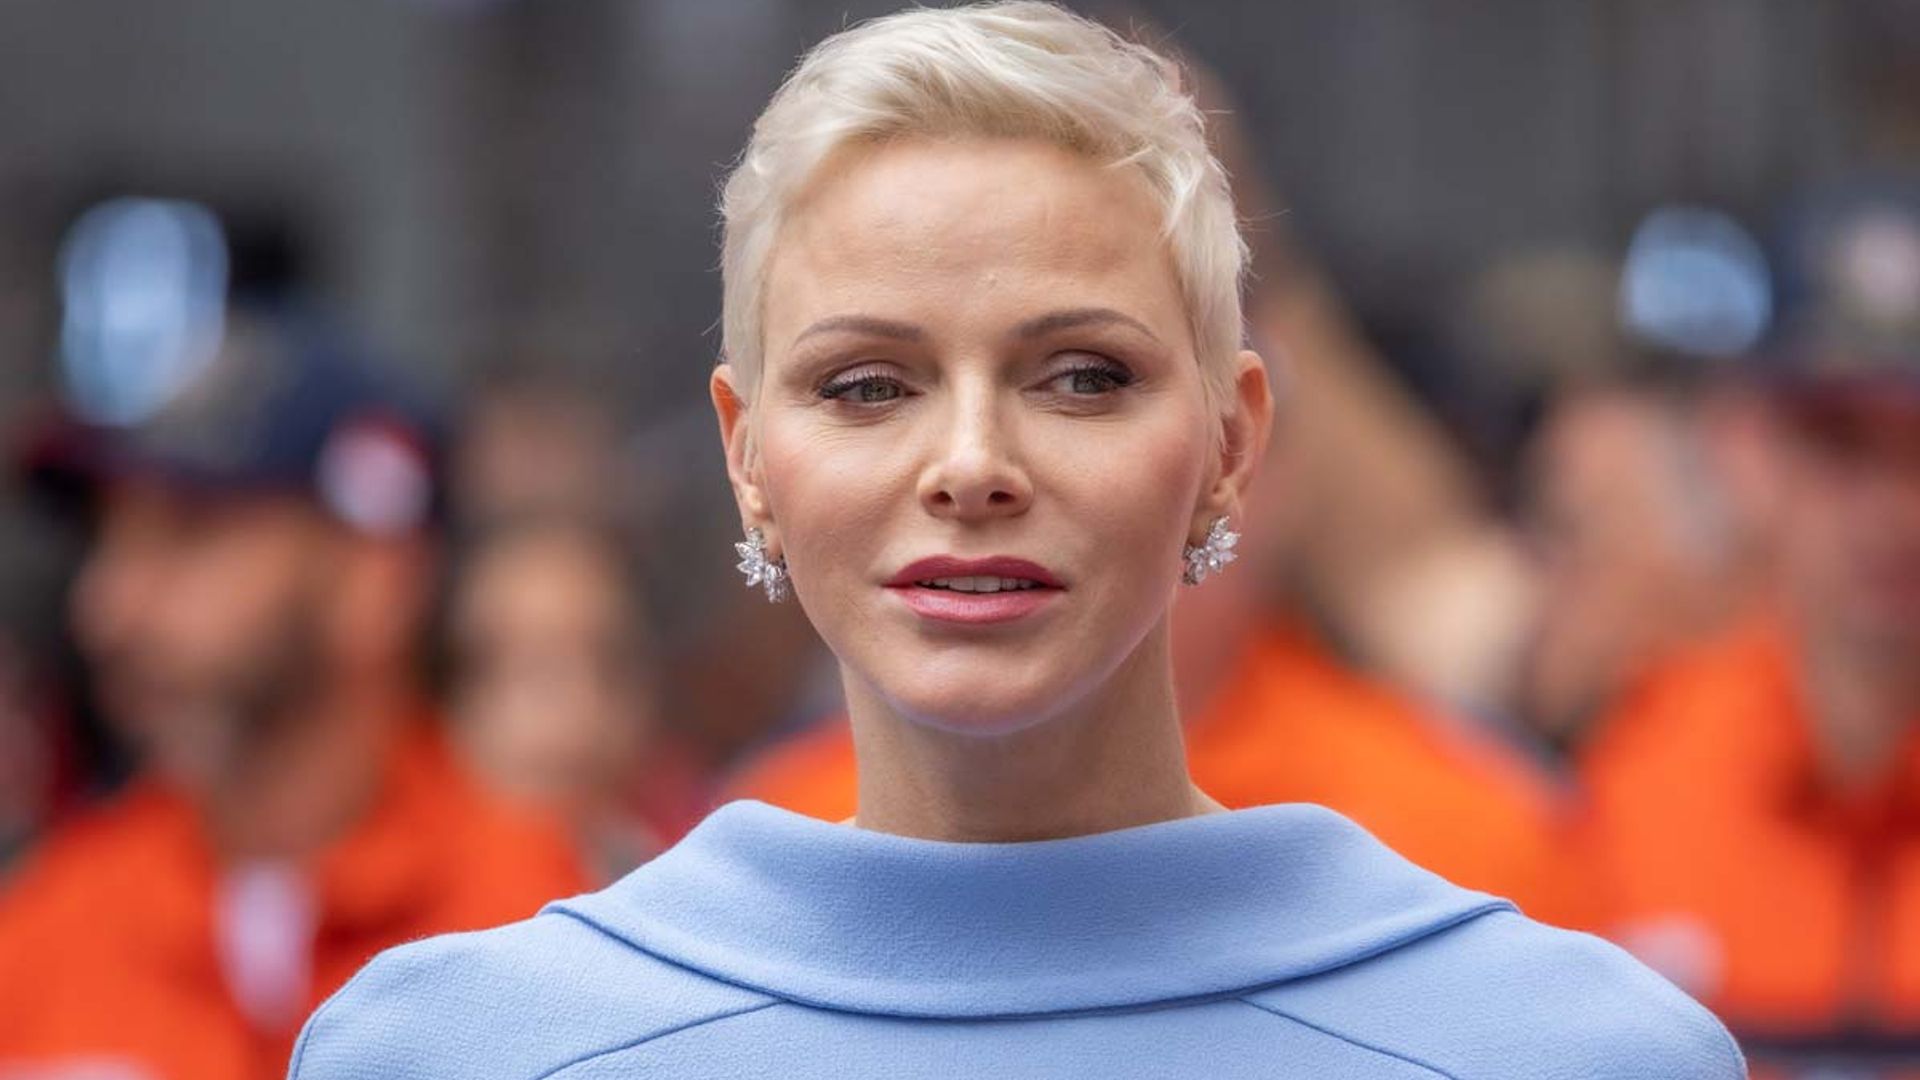 Princess Charlene of Monaco has a total Cinderella moment in must-see jumpsuit